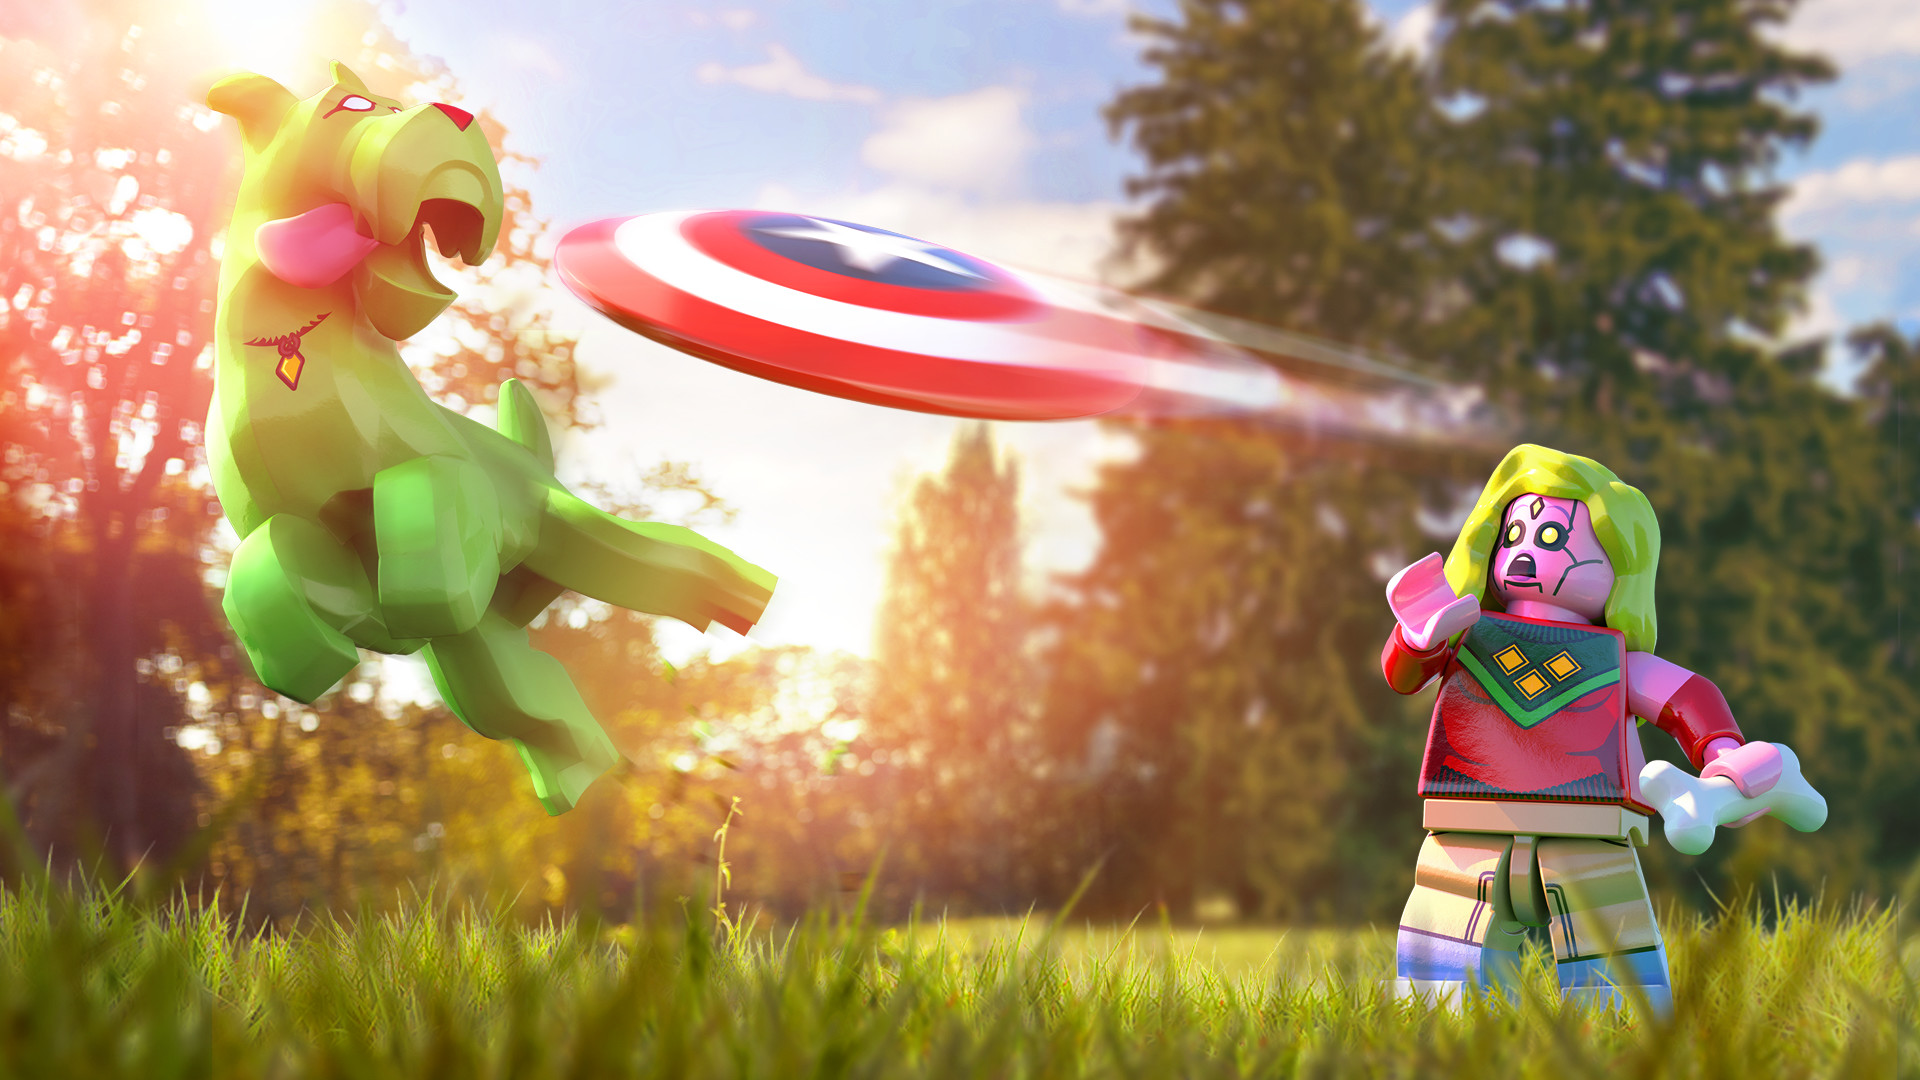 LEGO® Marvel Super Heroes 2 - Champions Character Pack on Steam